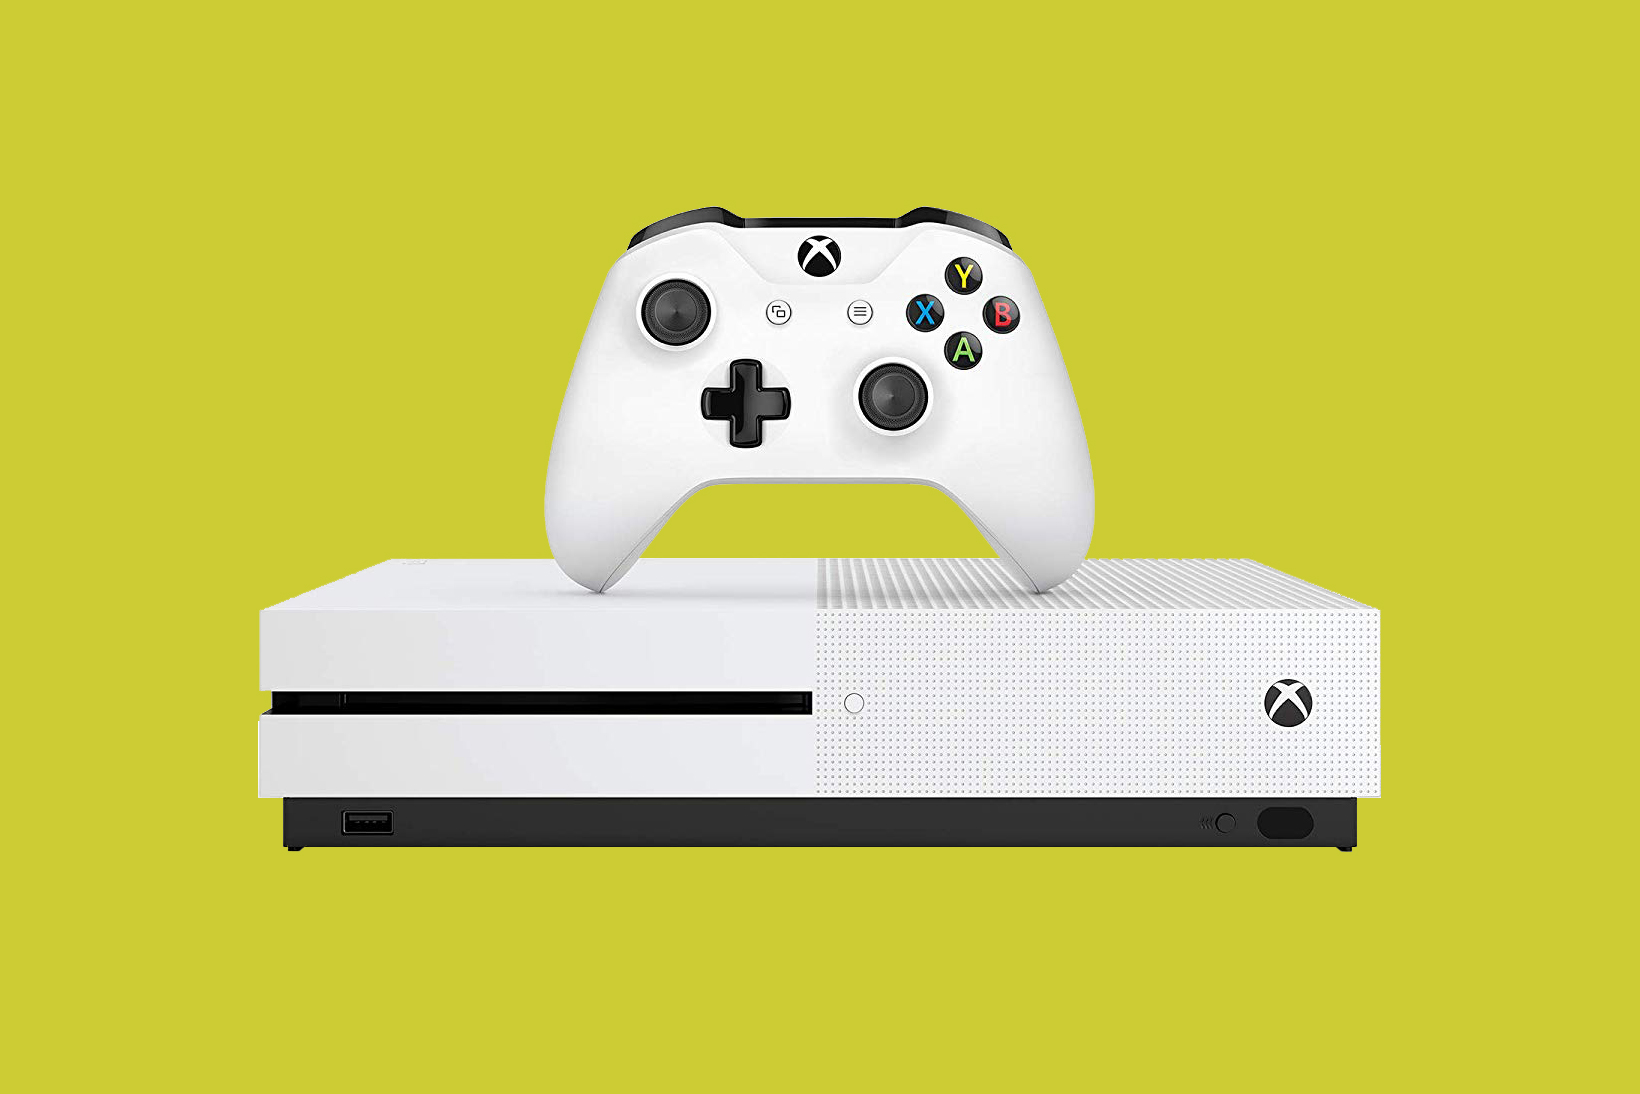 xbox one video game deals